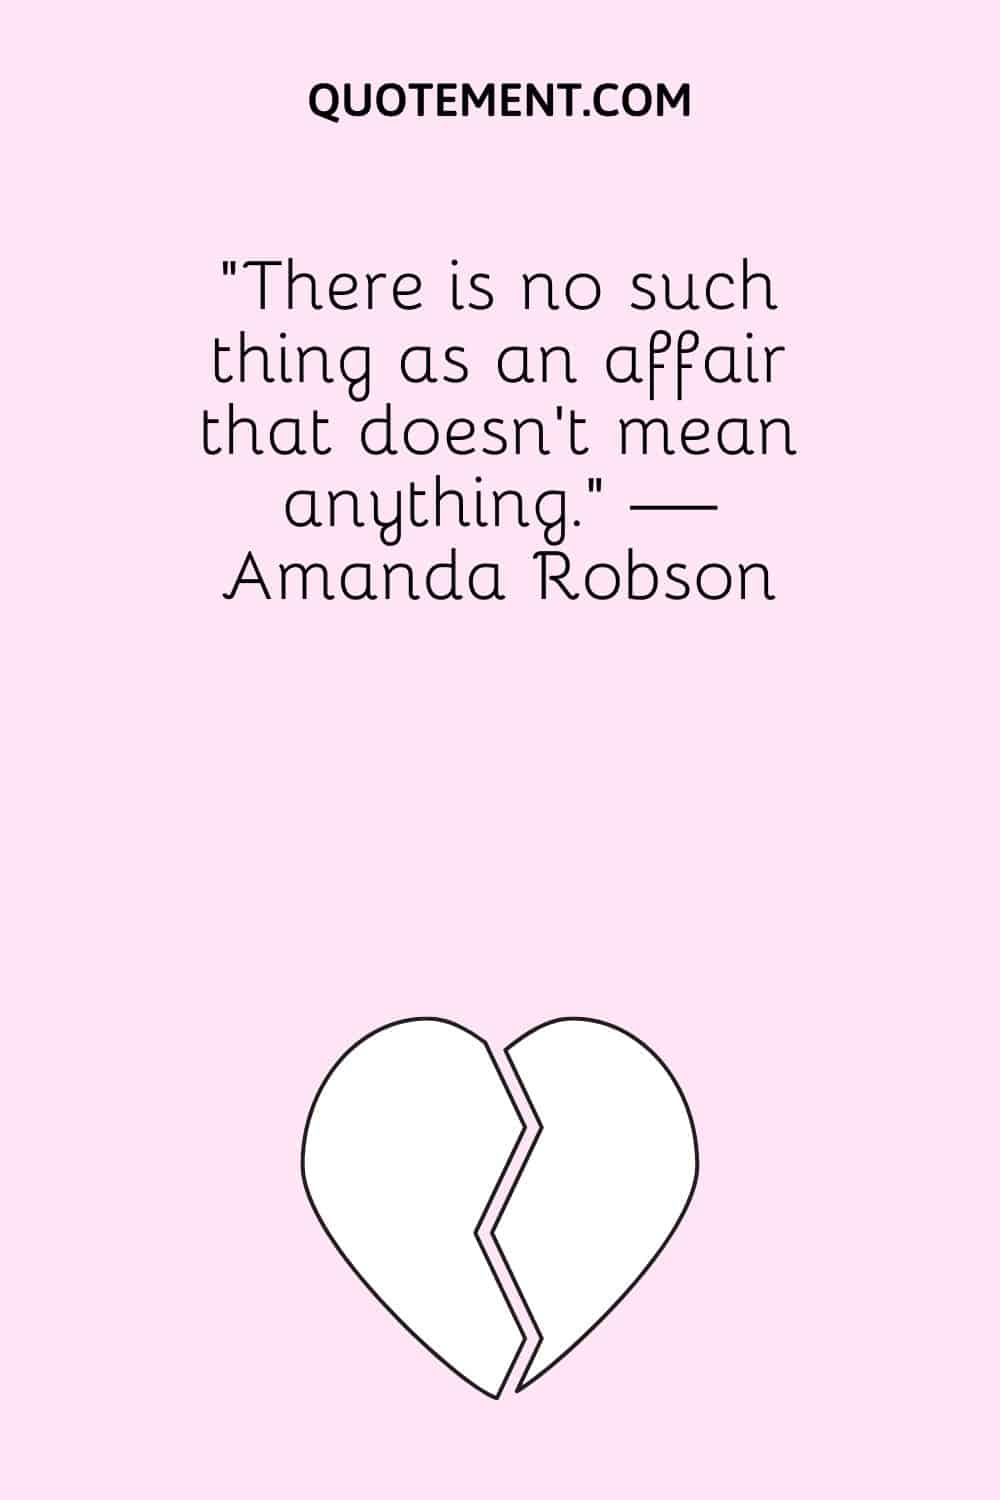 “There is no such thing as an affair that doesn’t mean anything.” — Amanda Robson